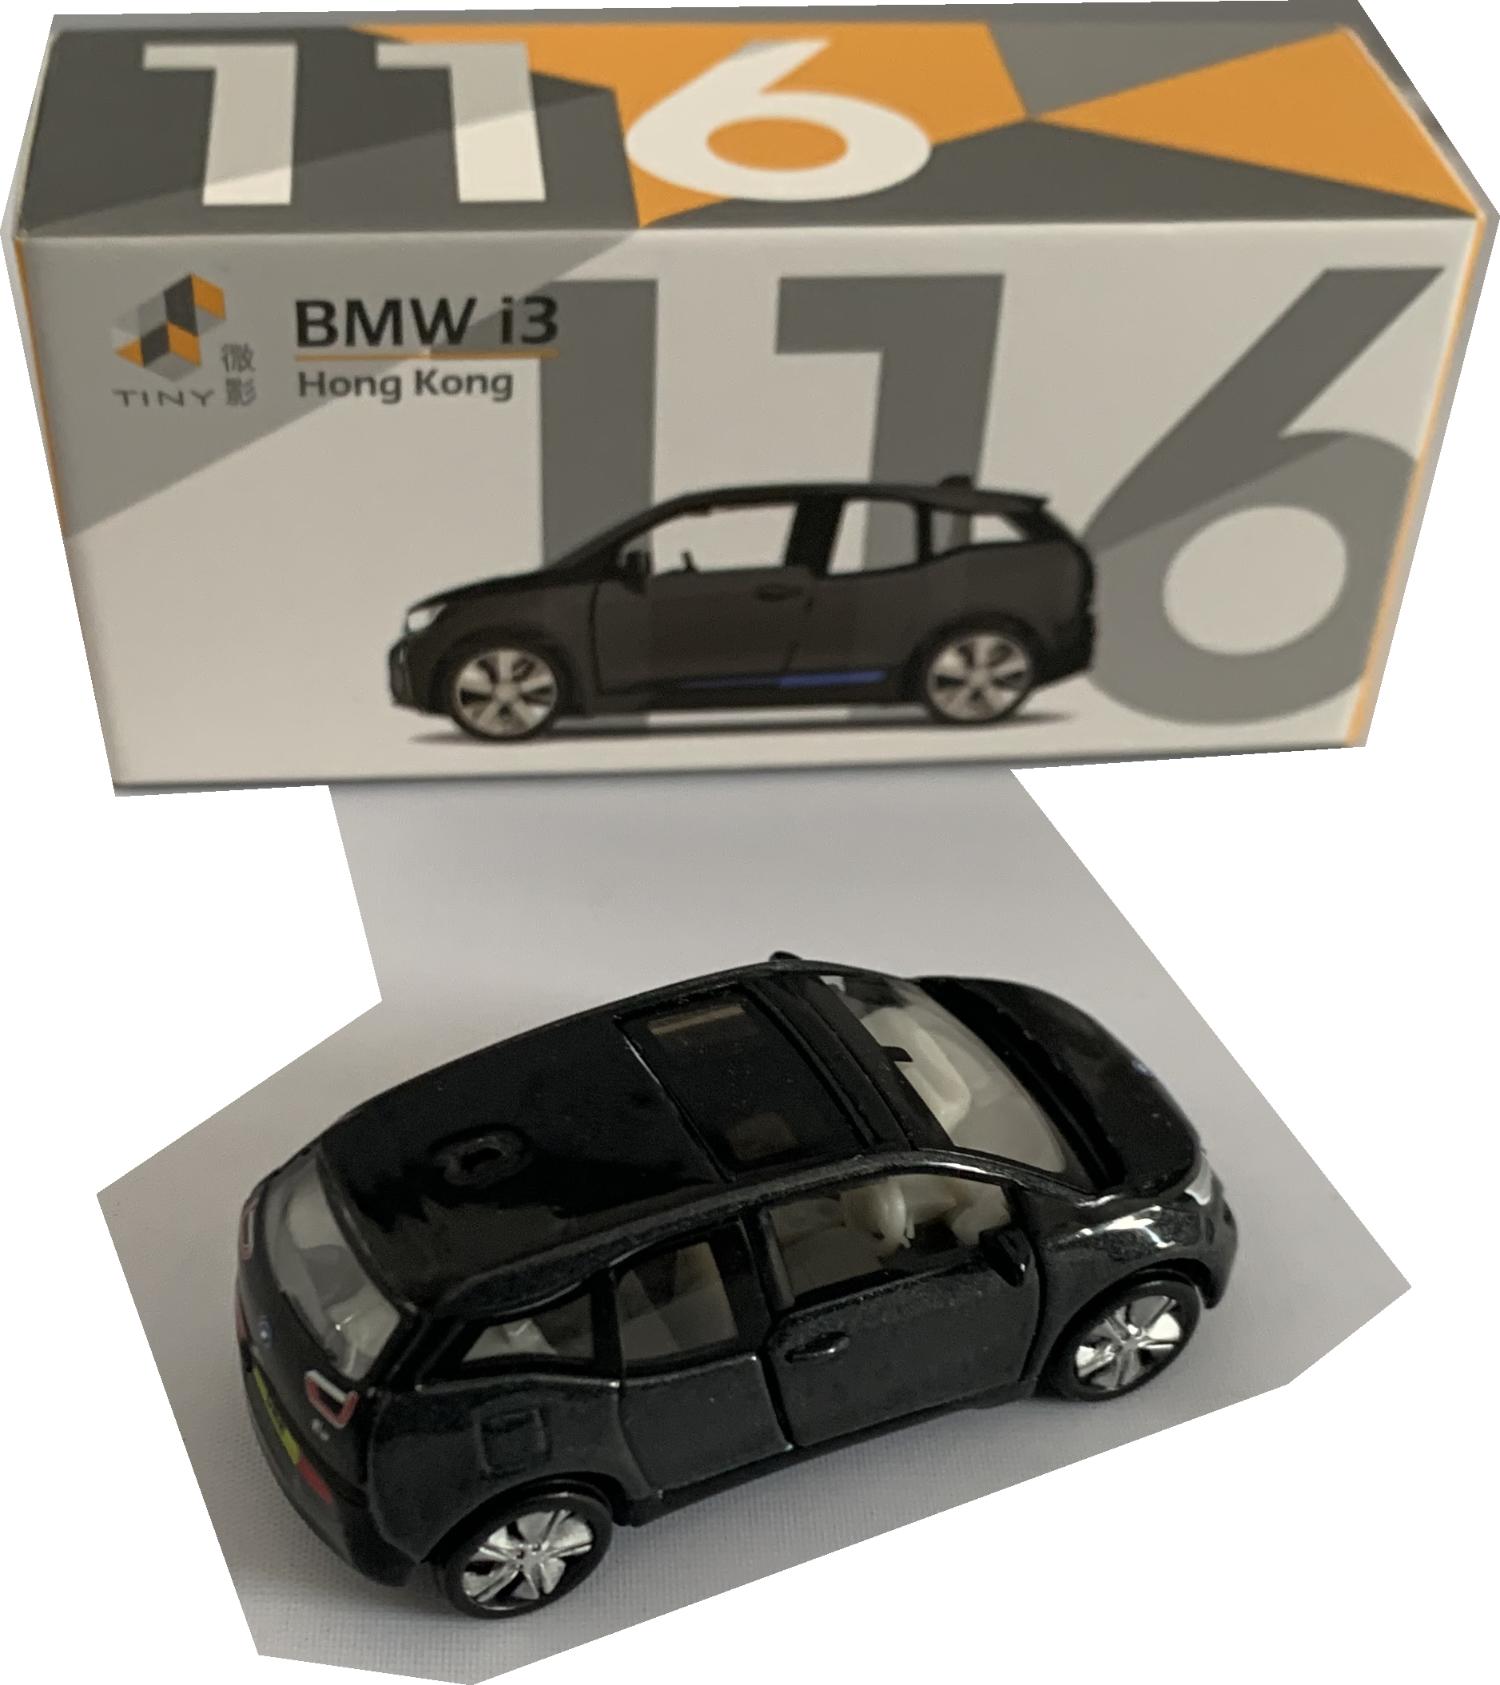 A good reproduction of the BMW i3 with detail throughout, all authentically recreated. The model is presented in a box, the car is approx. 6 cm long and the box is 10 cm long